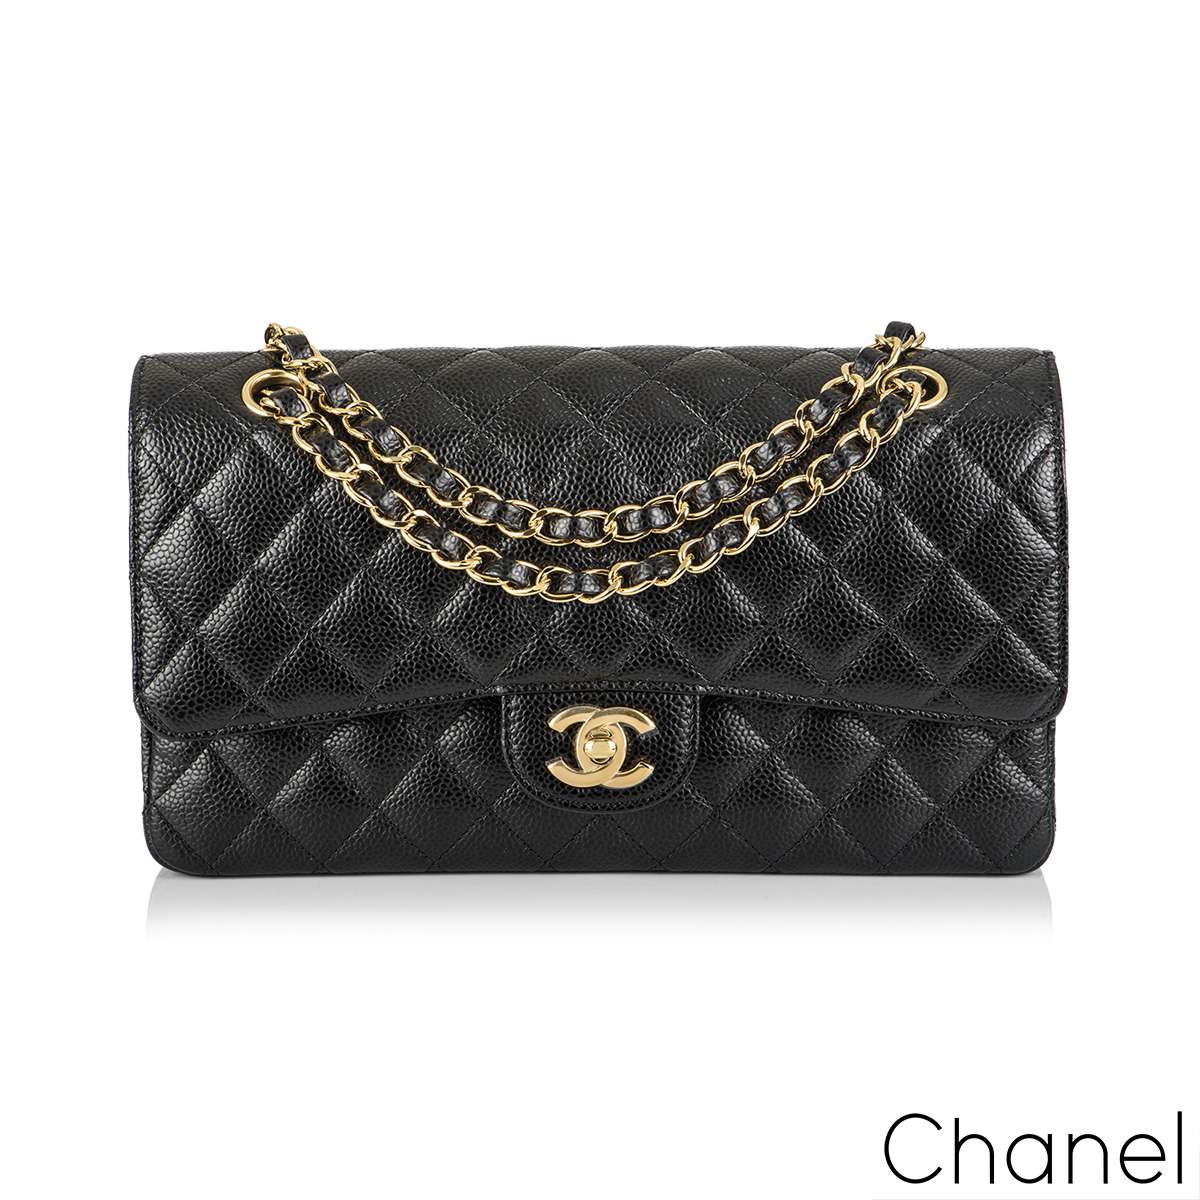 Chanel Classic Flap Bag Medium Review  How to Style  WHAT FITS INSIDE   YouTube